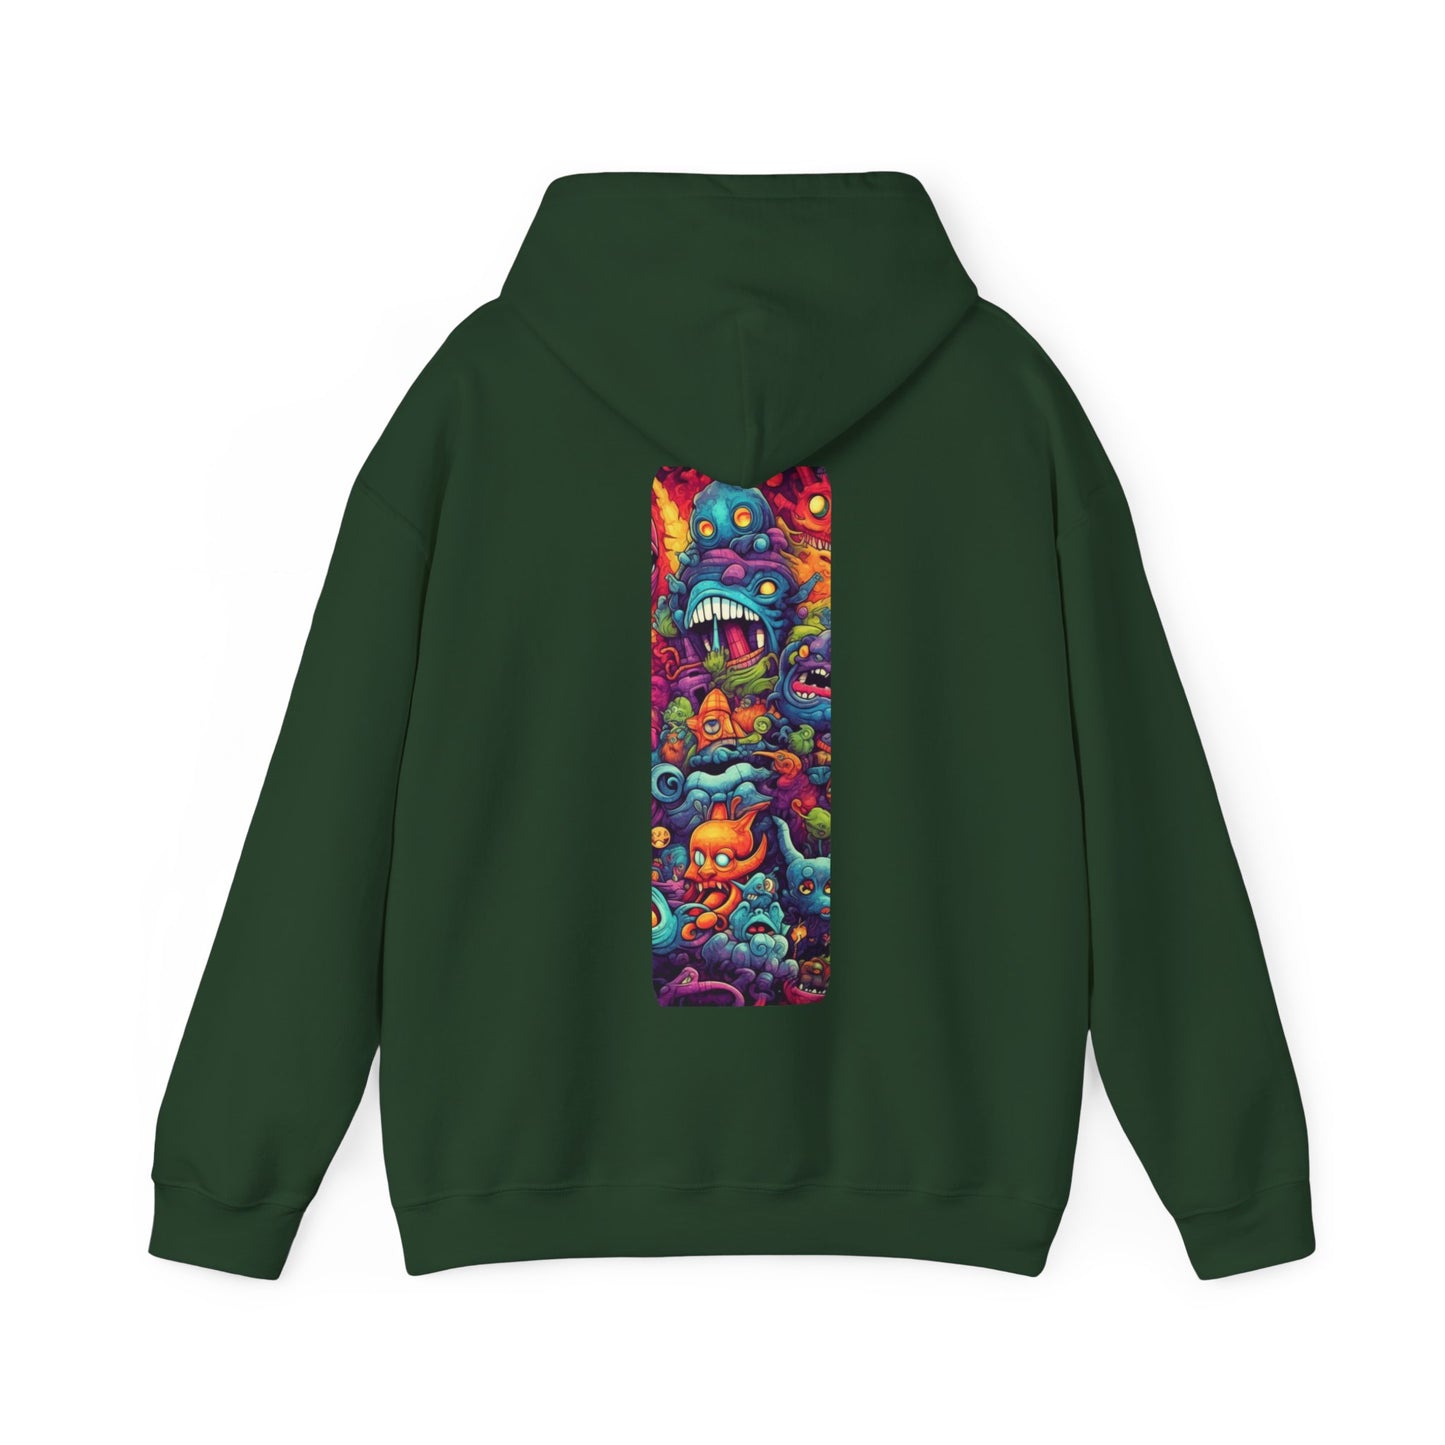 Artist Hoodie Featuring Whimsical Monster